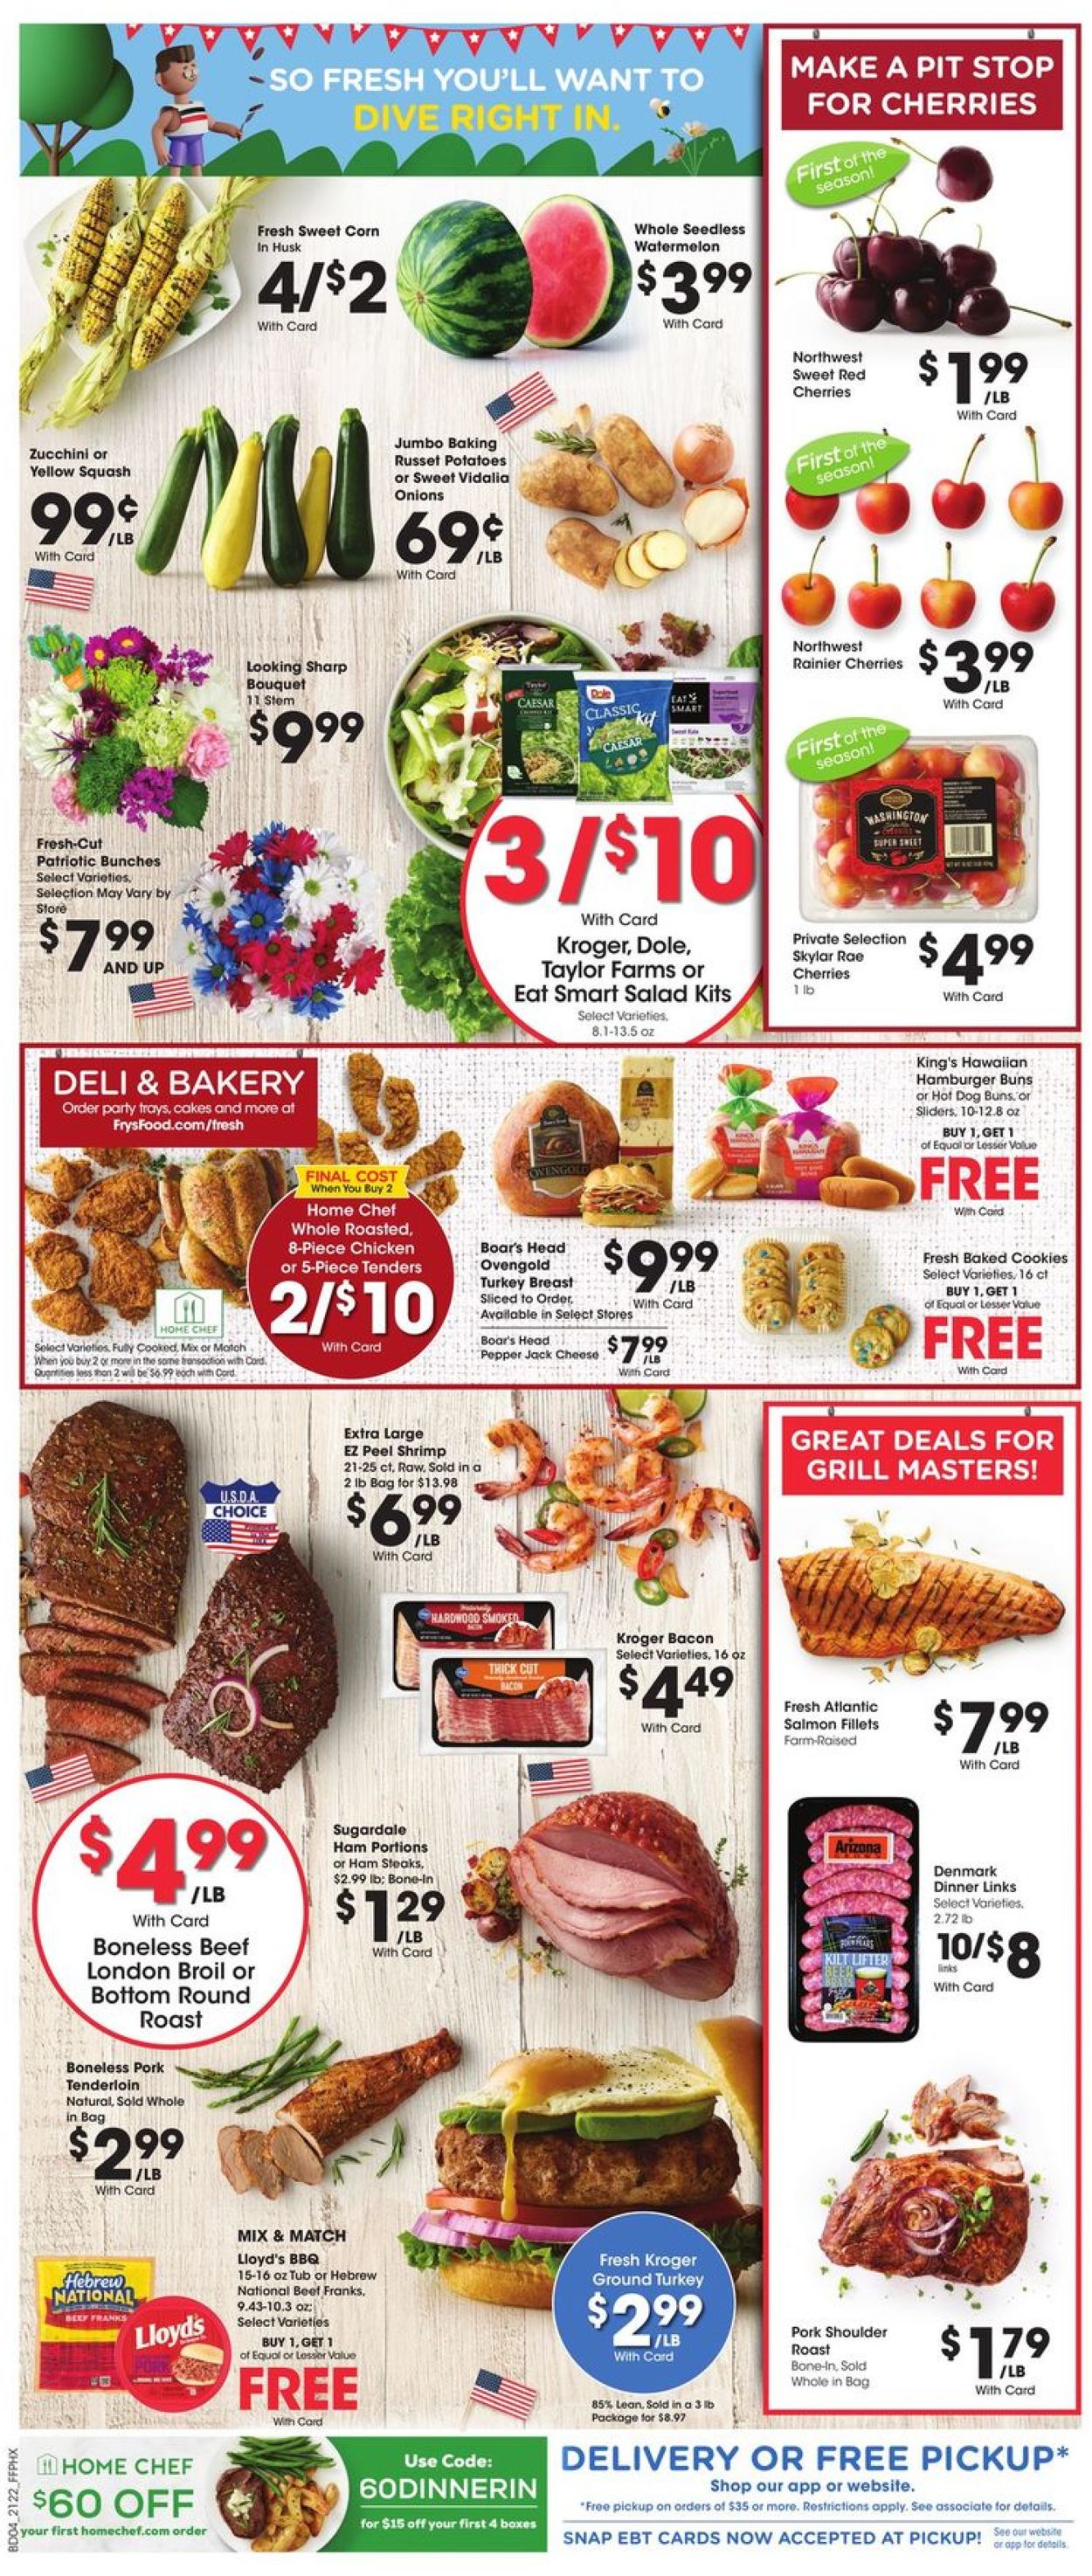 Fry’s Ad from 06/30/2021